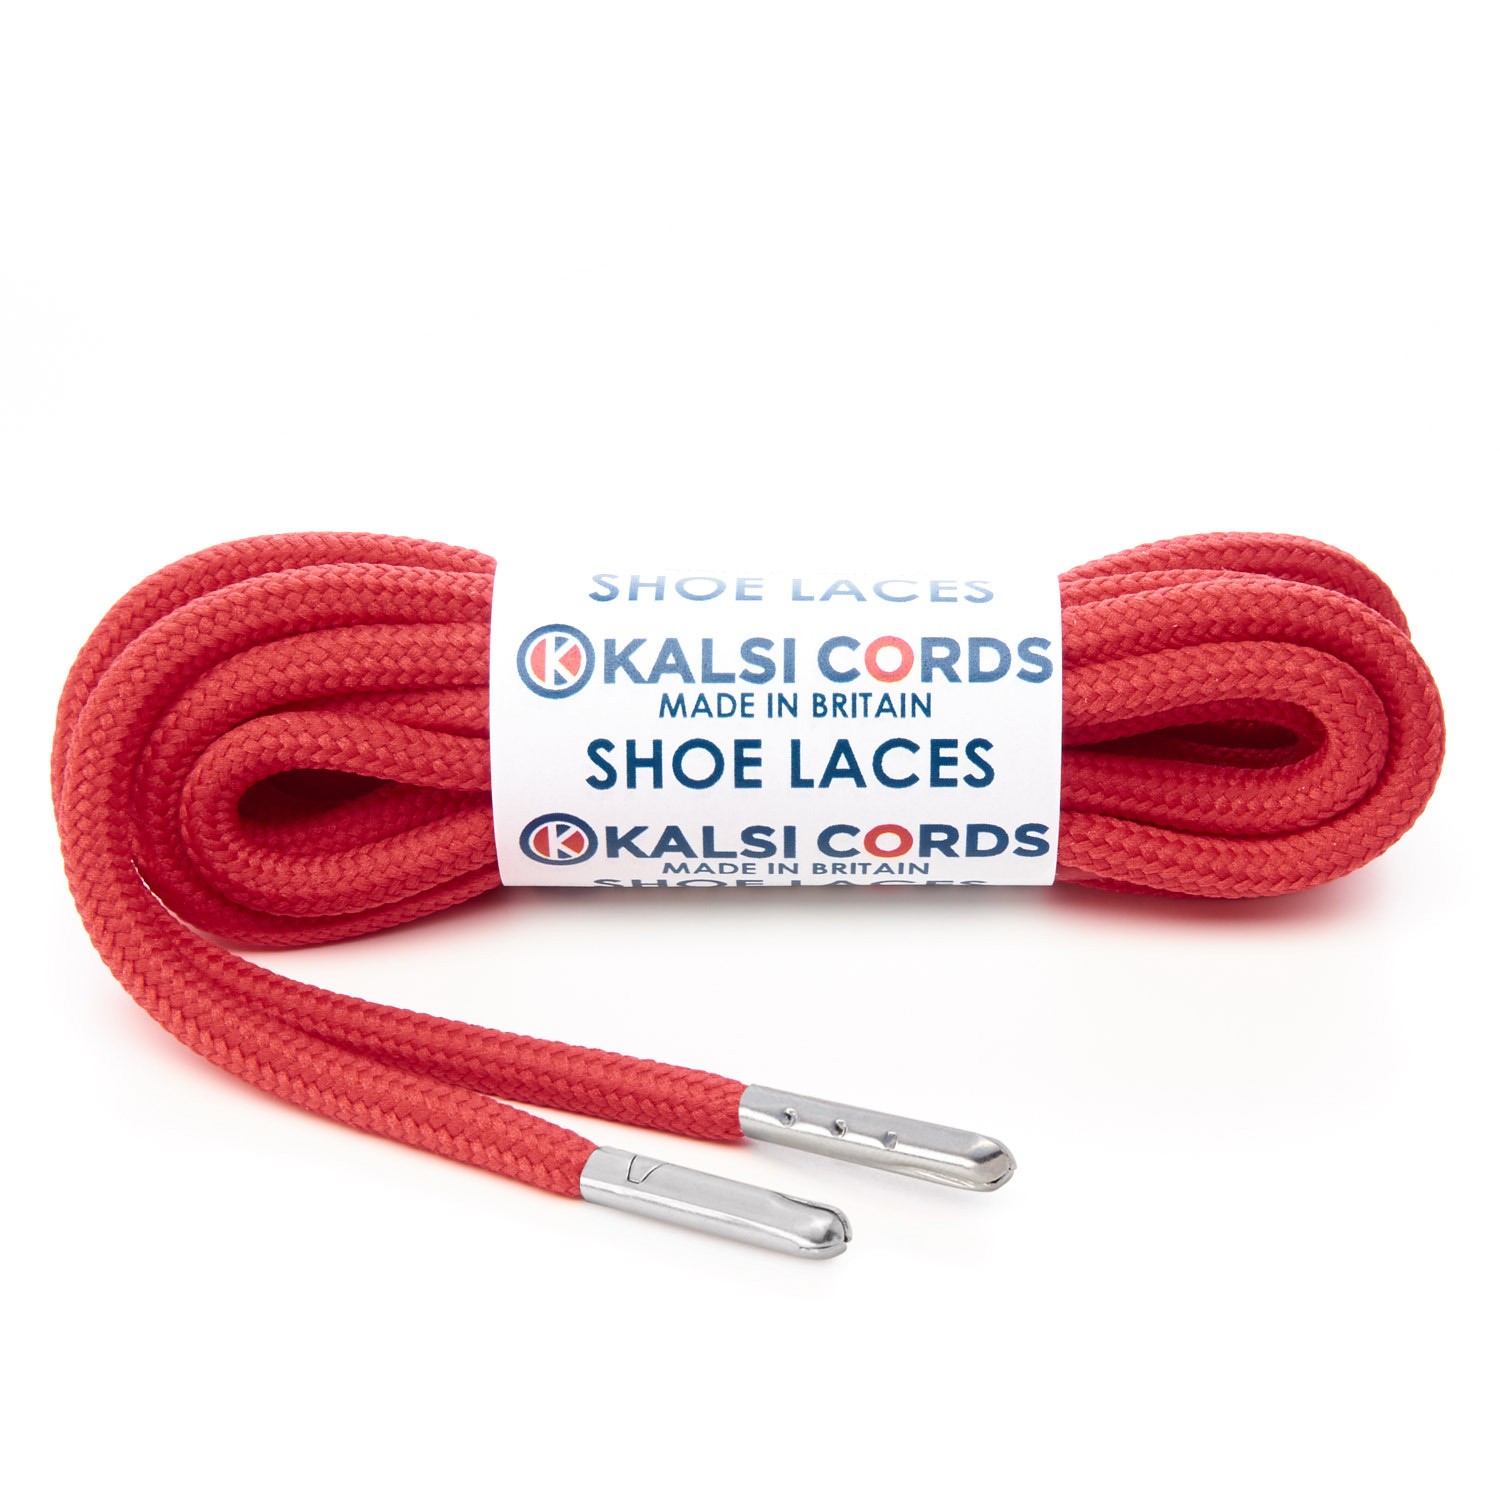 T621 5mm Round Polyester Shoe Laces Rose Madder Red 1 Silver Metal Tip Kalsi Cords